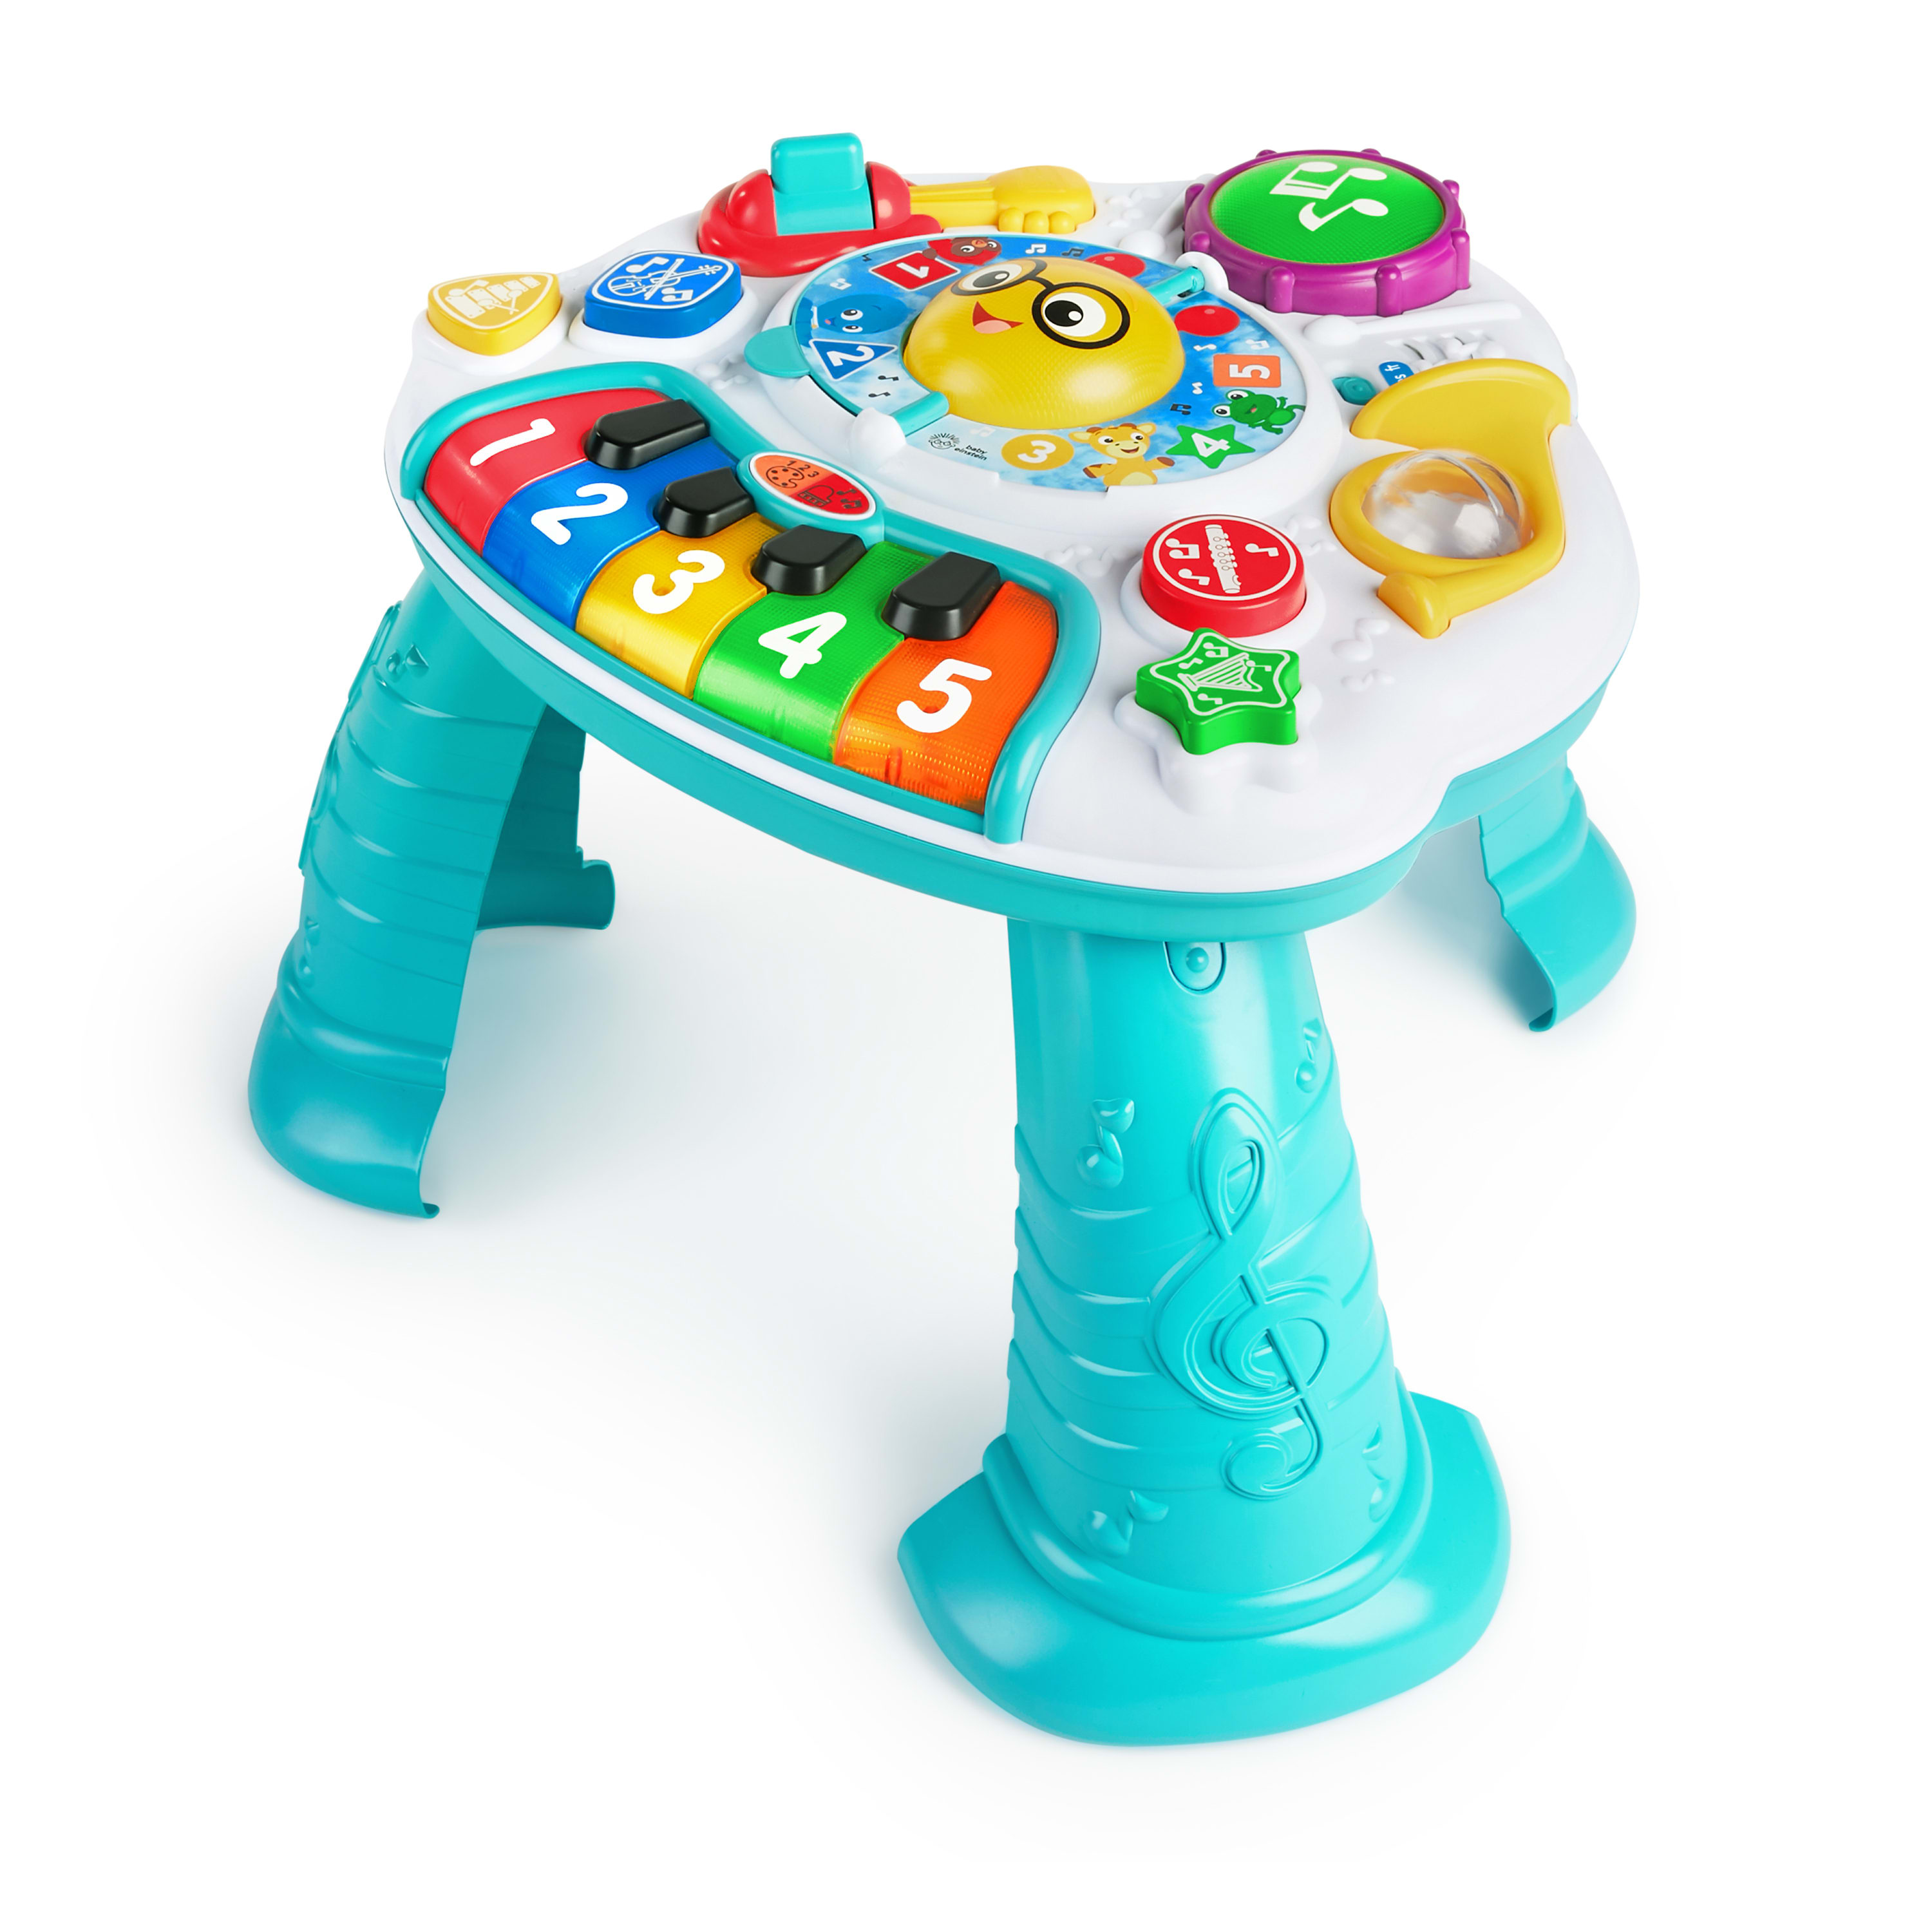 Baby Einstein Discovering Music Activity Table, Ages 6 months + - image 1 of 15